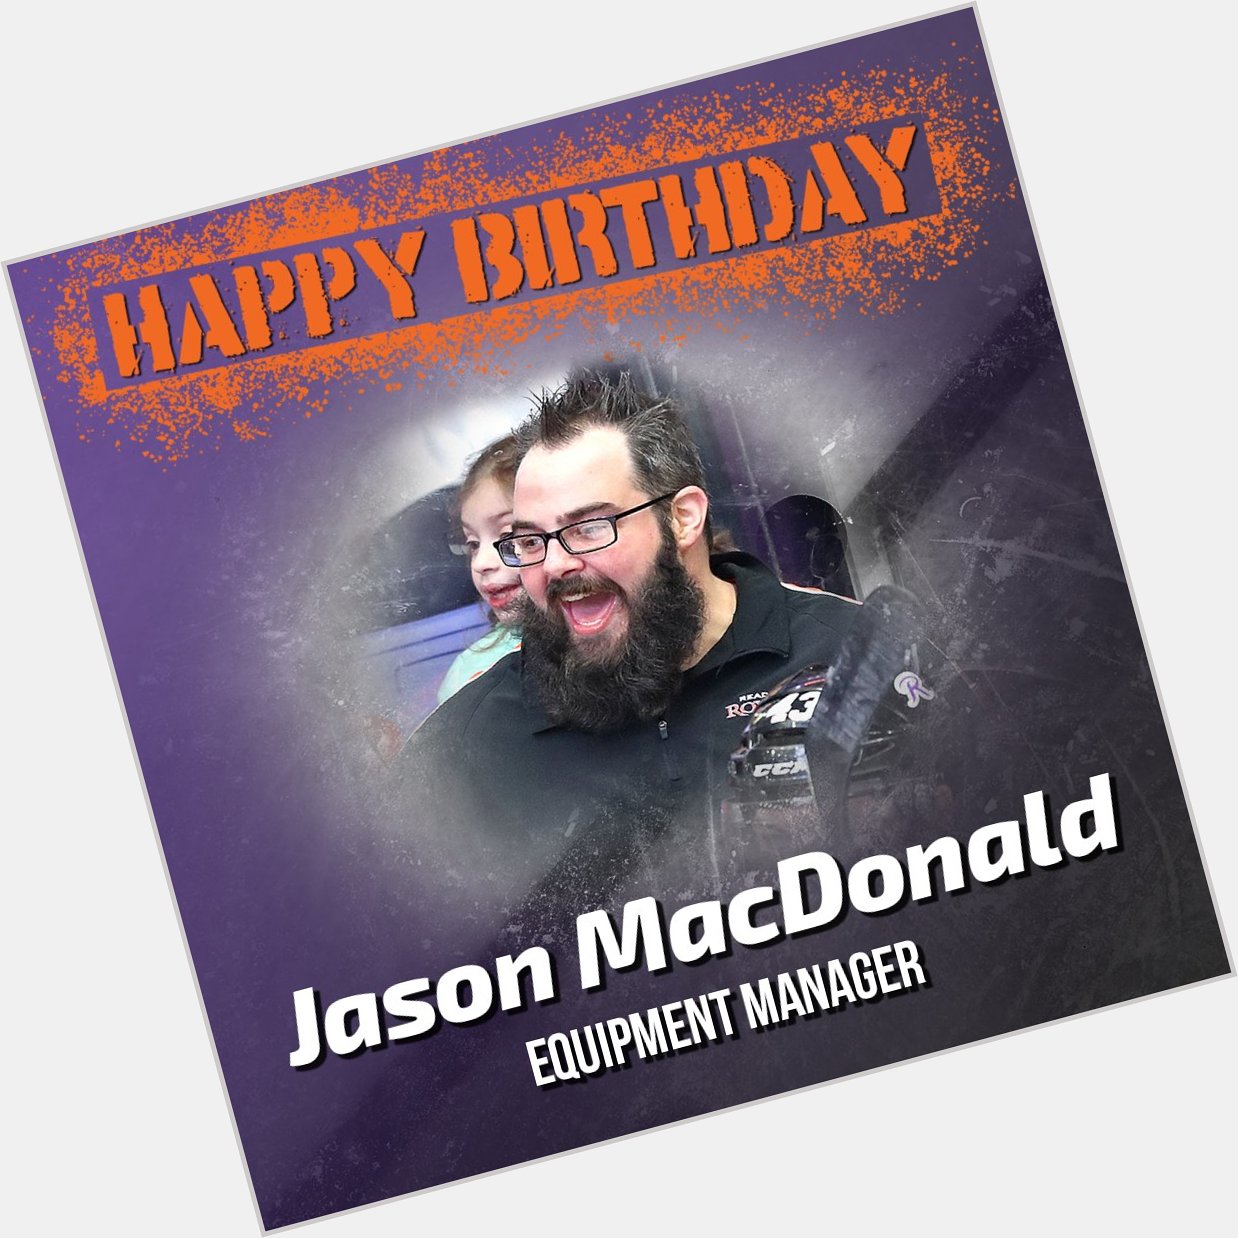 Happy birthday to Jason MacDonald, our Equipment Manager! Drop him a HBD in the comments  